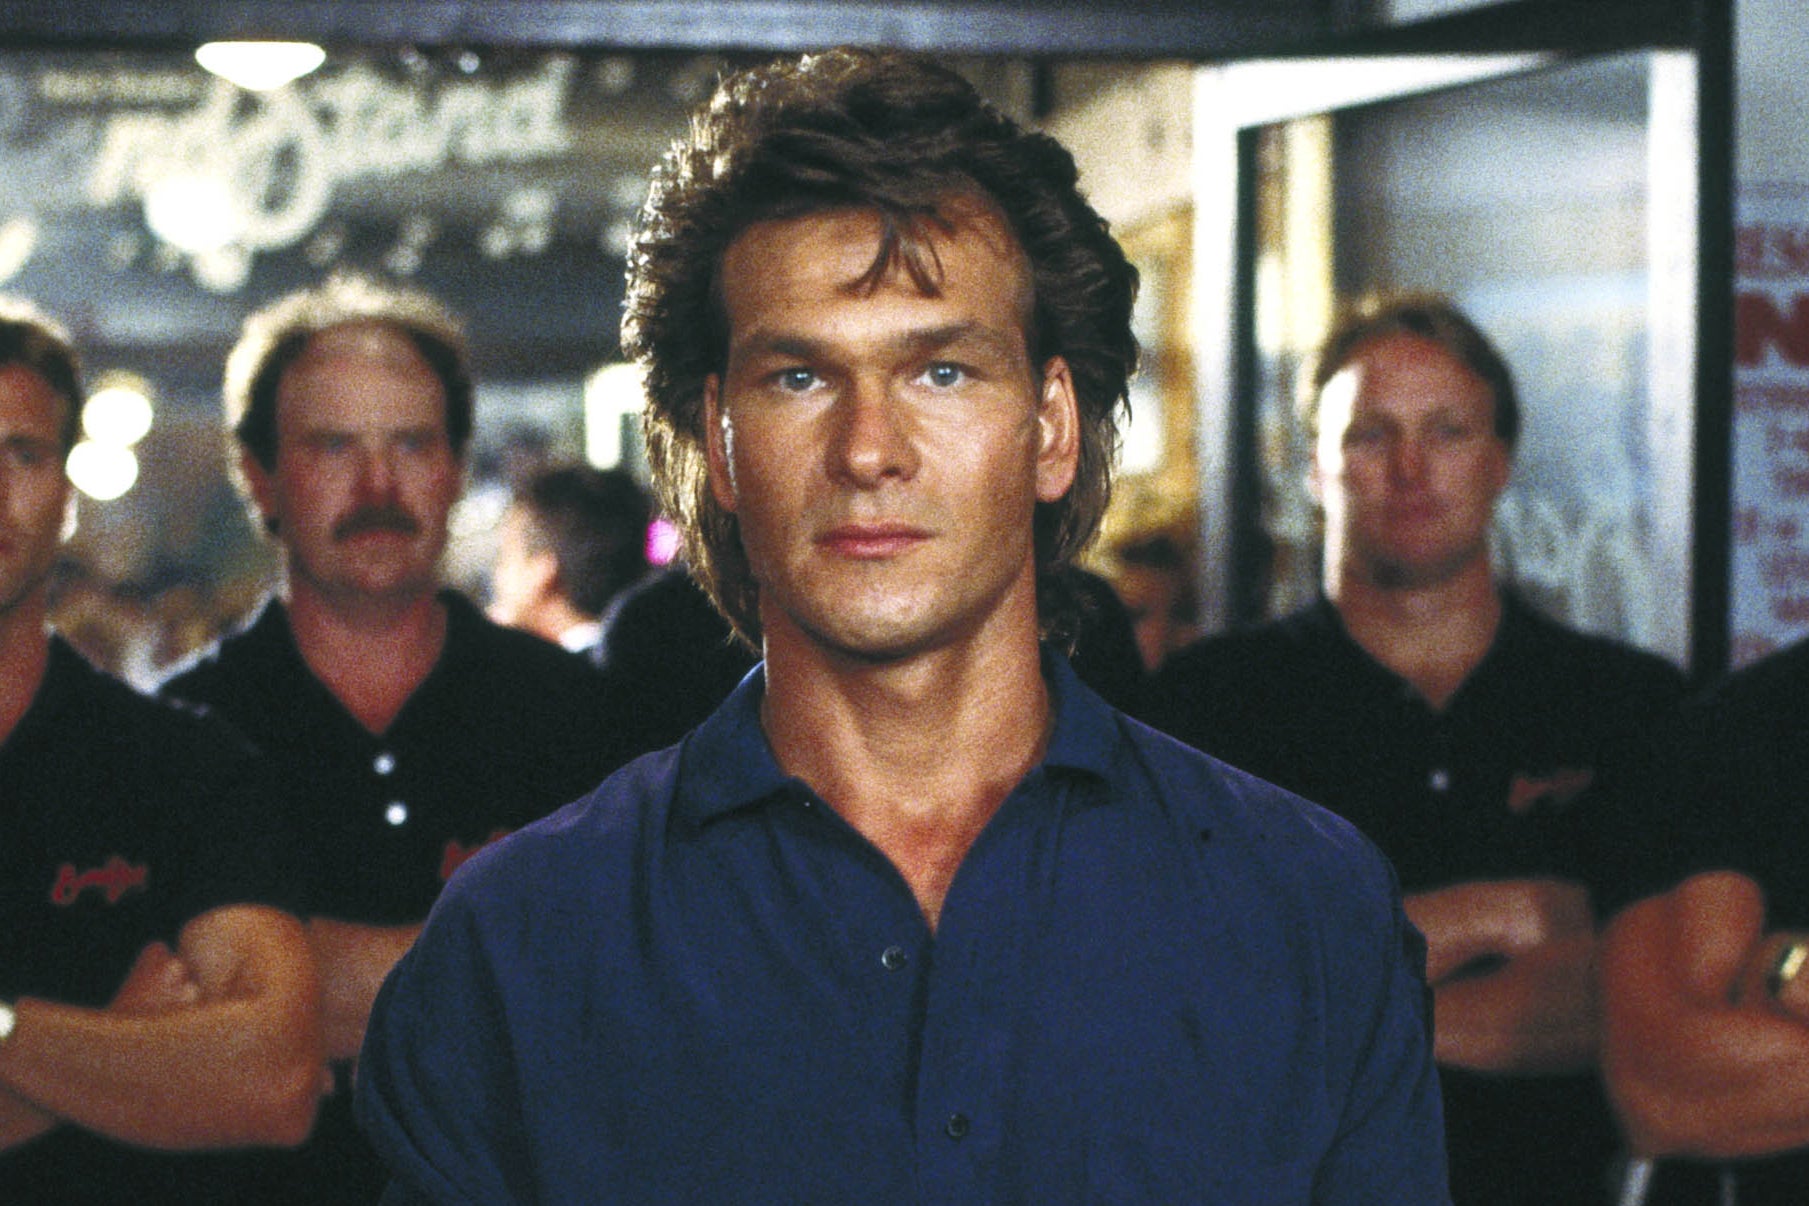 Patrick Swayze in the raucous 1989 action thriller ‘Road House’